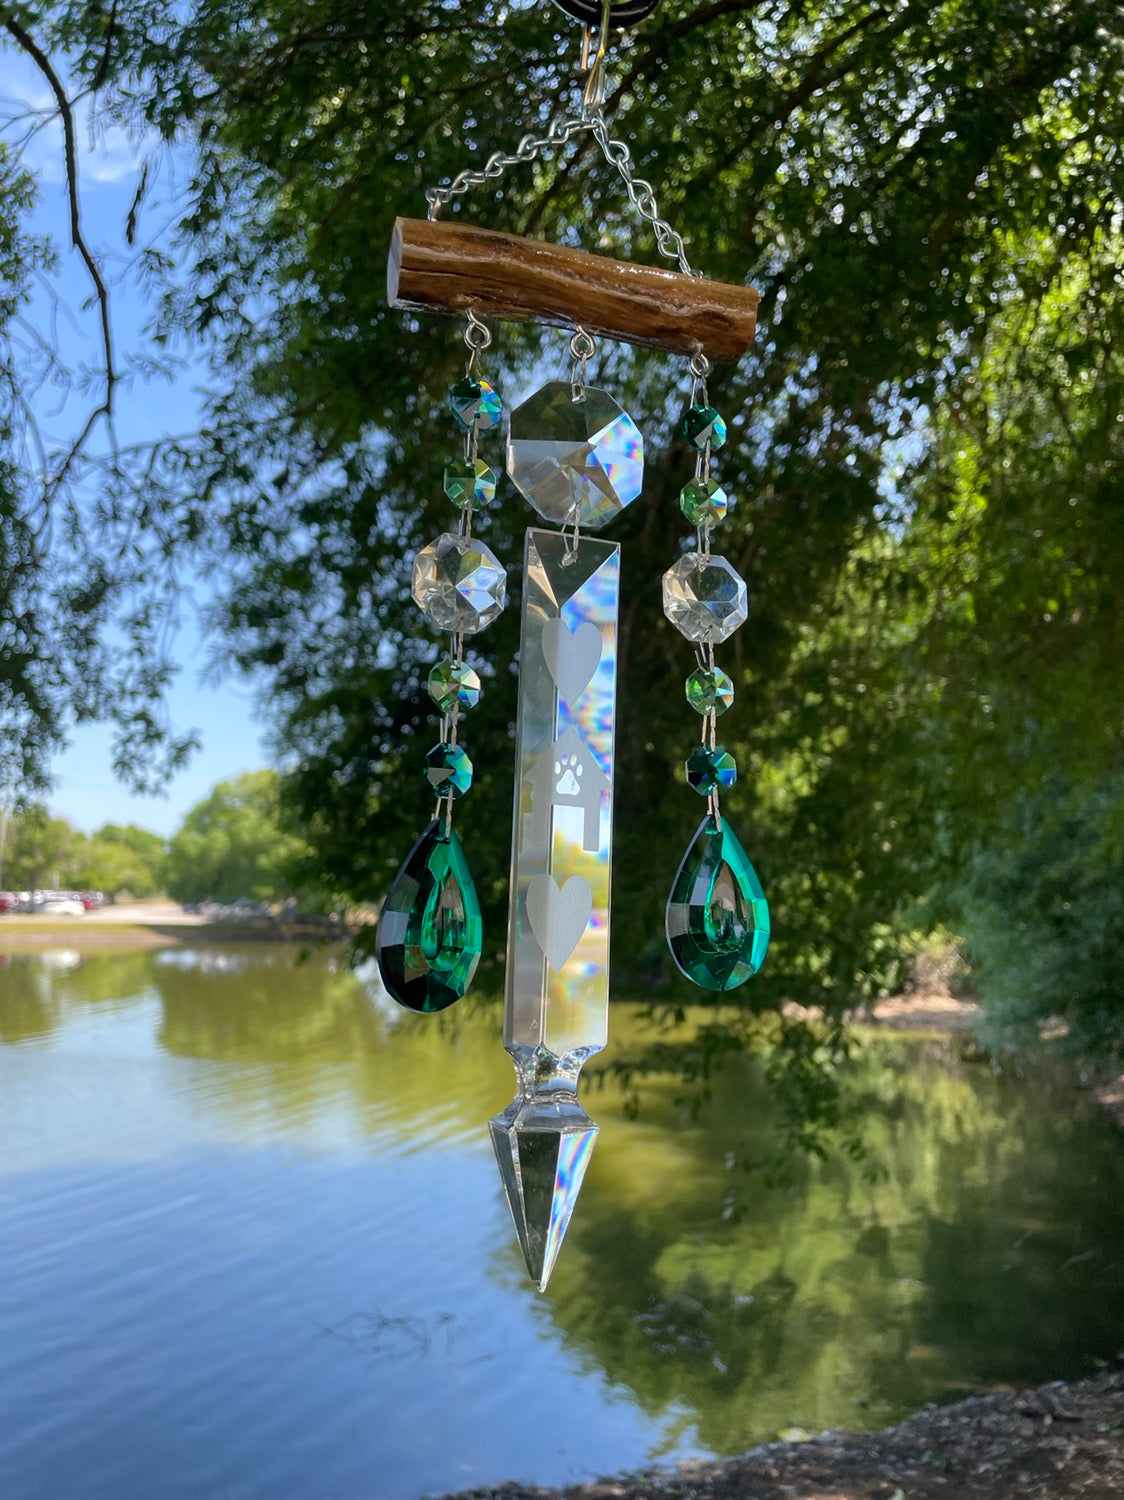 driftwood wind-chime chandelier crystals dog unique gift